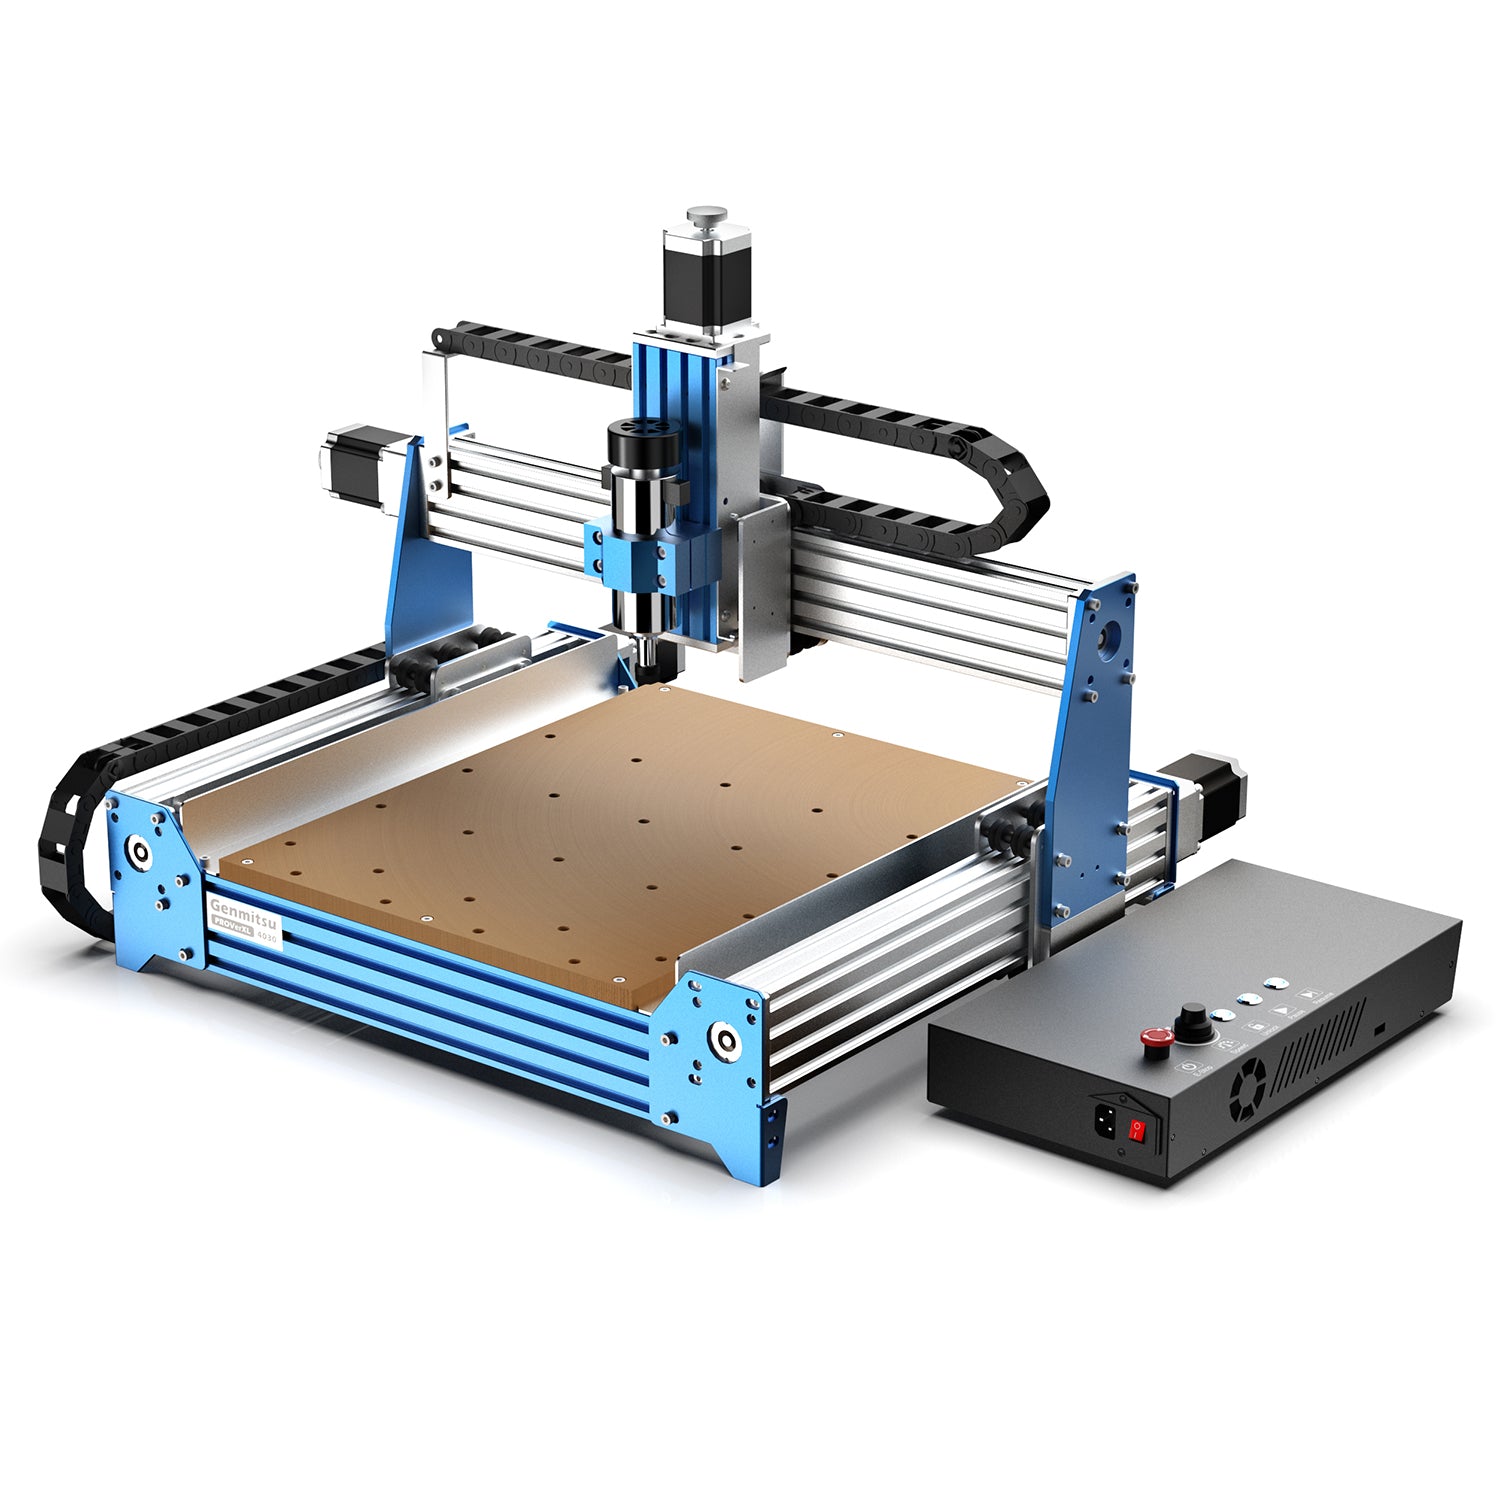 The Genmitsu PROVerXL 4030 CNC Router: A Budget-Friendly Option that Won't Compromise on Quality or Features